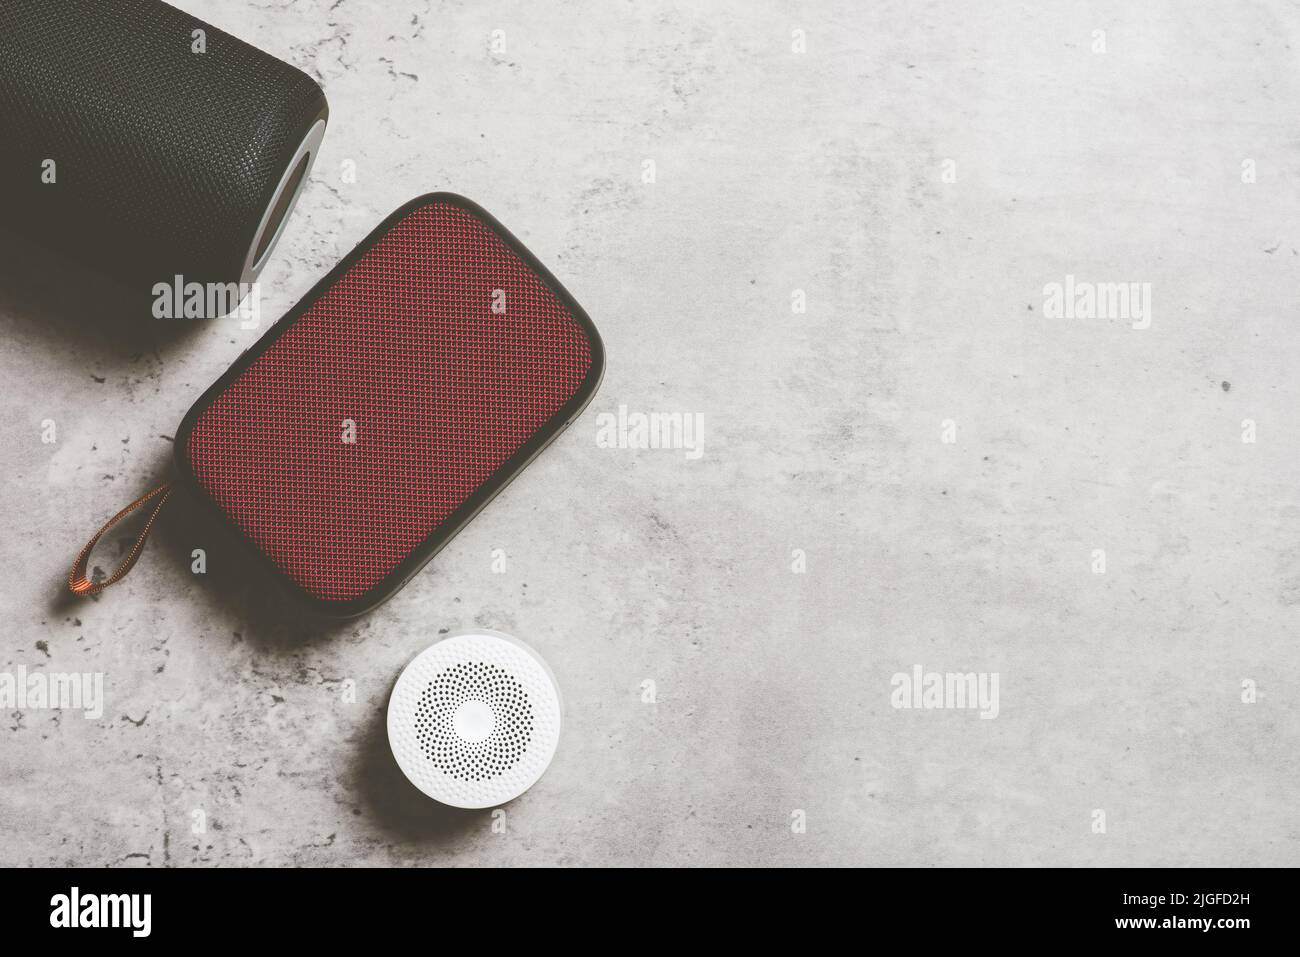 relaxing concept, close up wireless portable speaker for music listening. Stock Photo